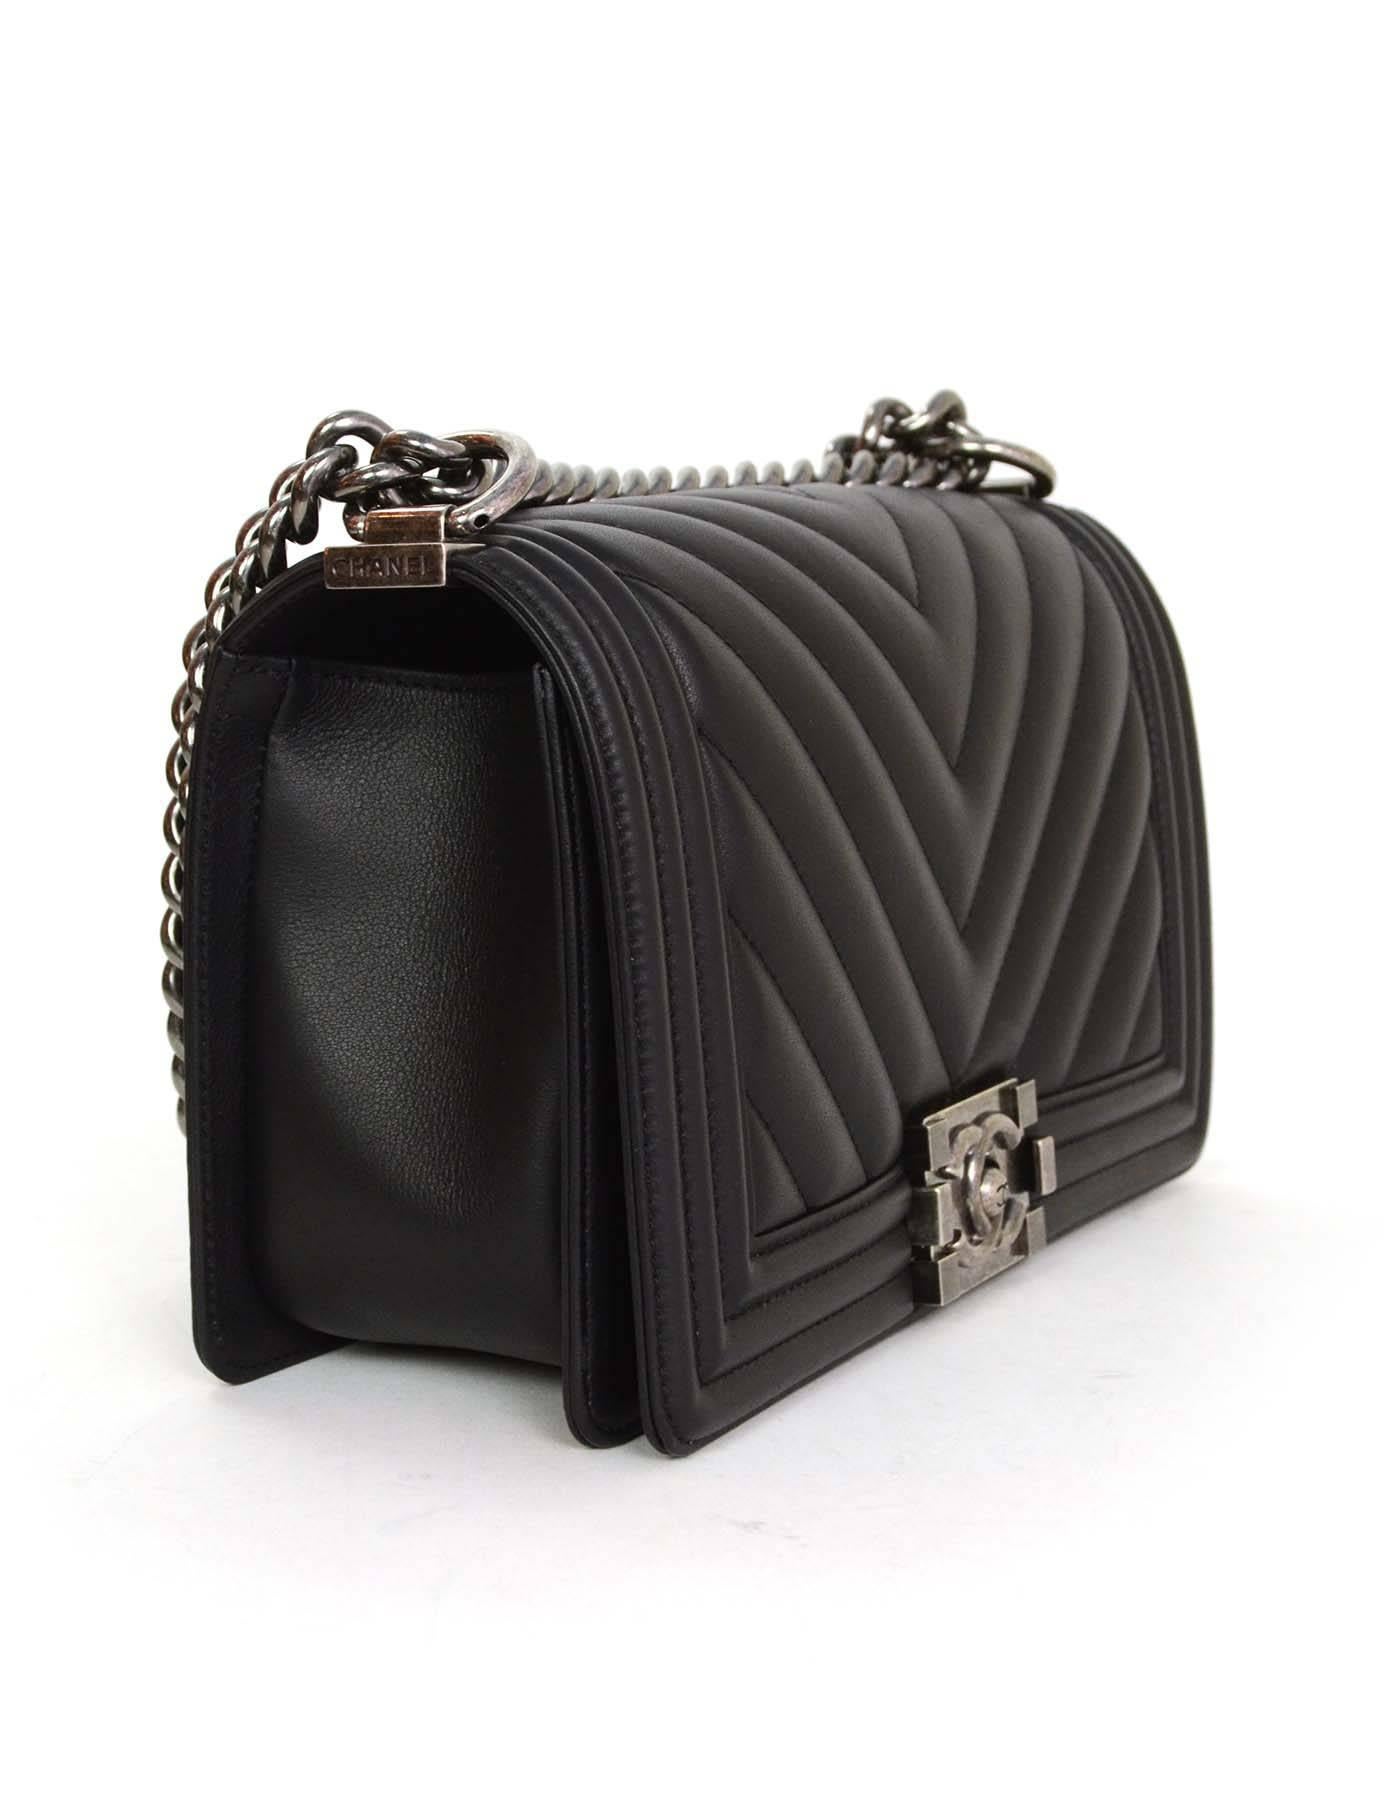 Chanel '16 Black Chevron Lambskin Old Medium Boy Bag 
Features adjustable shoulder strap and chevron quilting throughout front flap top and back panel of bag

Made In: France
Year of Production: 2016
Color: Black
Hardware: Oxidized